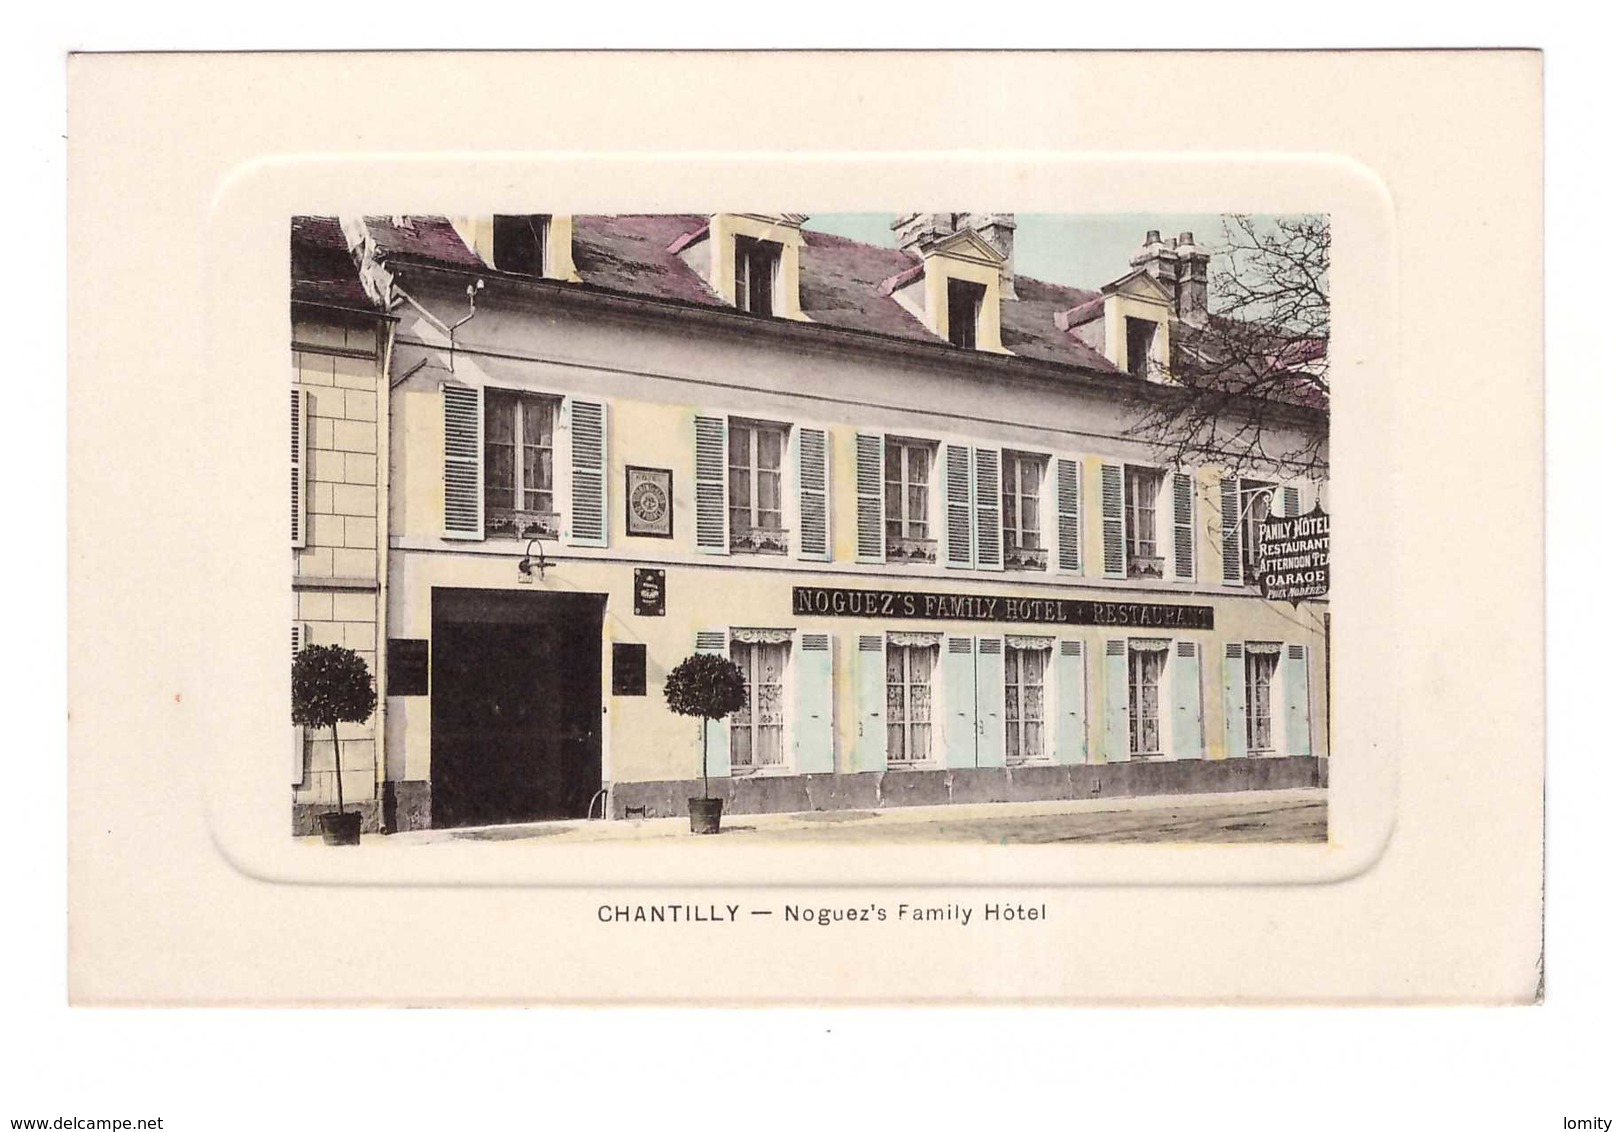 60 Chantilly Noguez's Family Hotel Restaurant Cpa - Chantilly